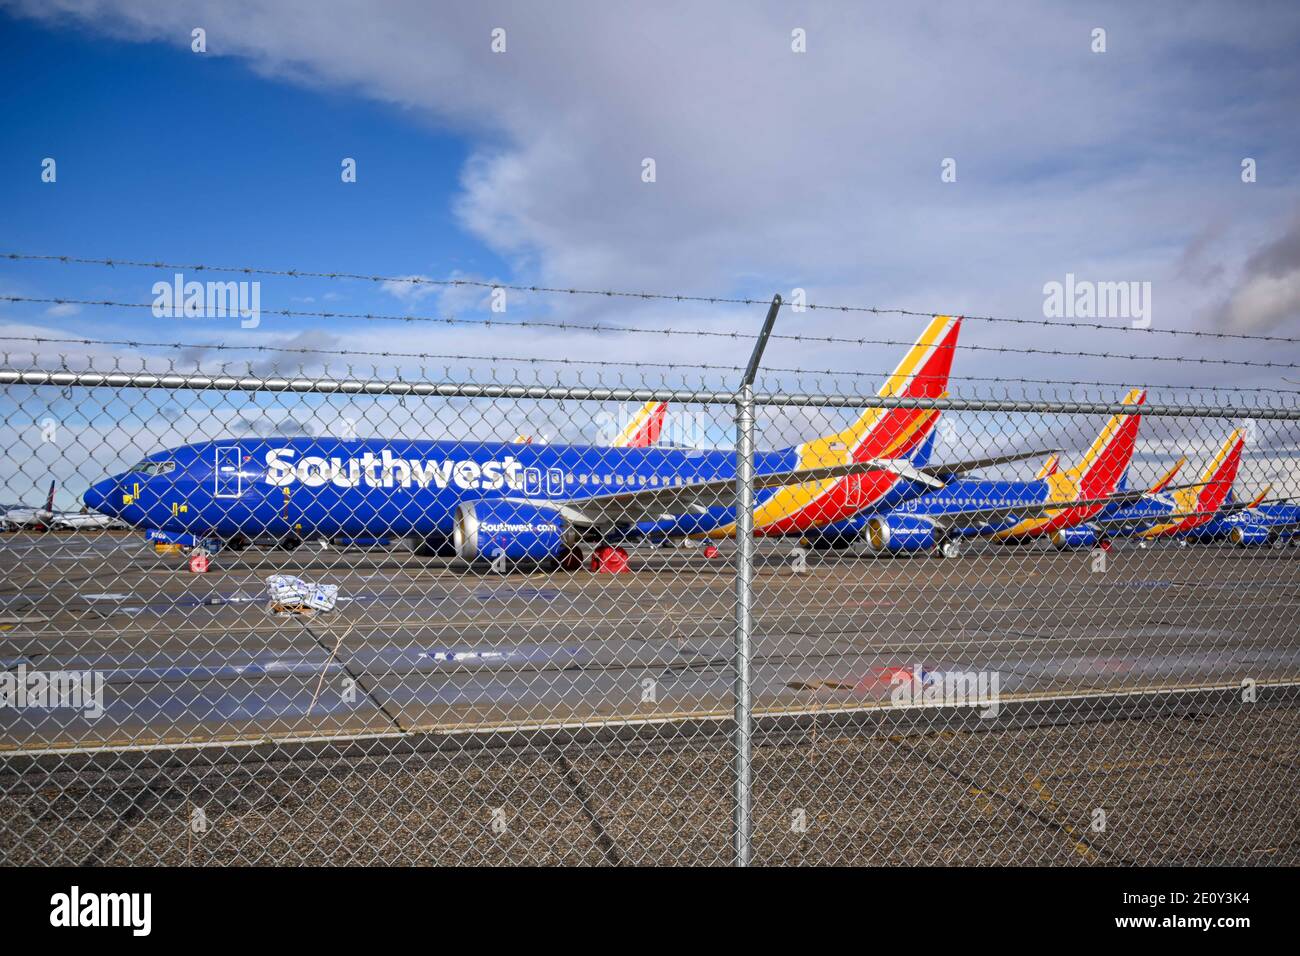 General overall view of a Southwest Airlines Boeing 737 MAX 8 stored at the Southern California Logistics Airport, Monday, Dec. 28, 2020 in Victorvill Stock Photo